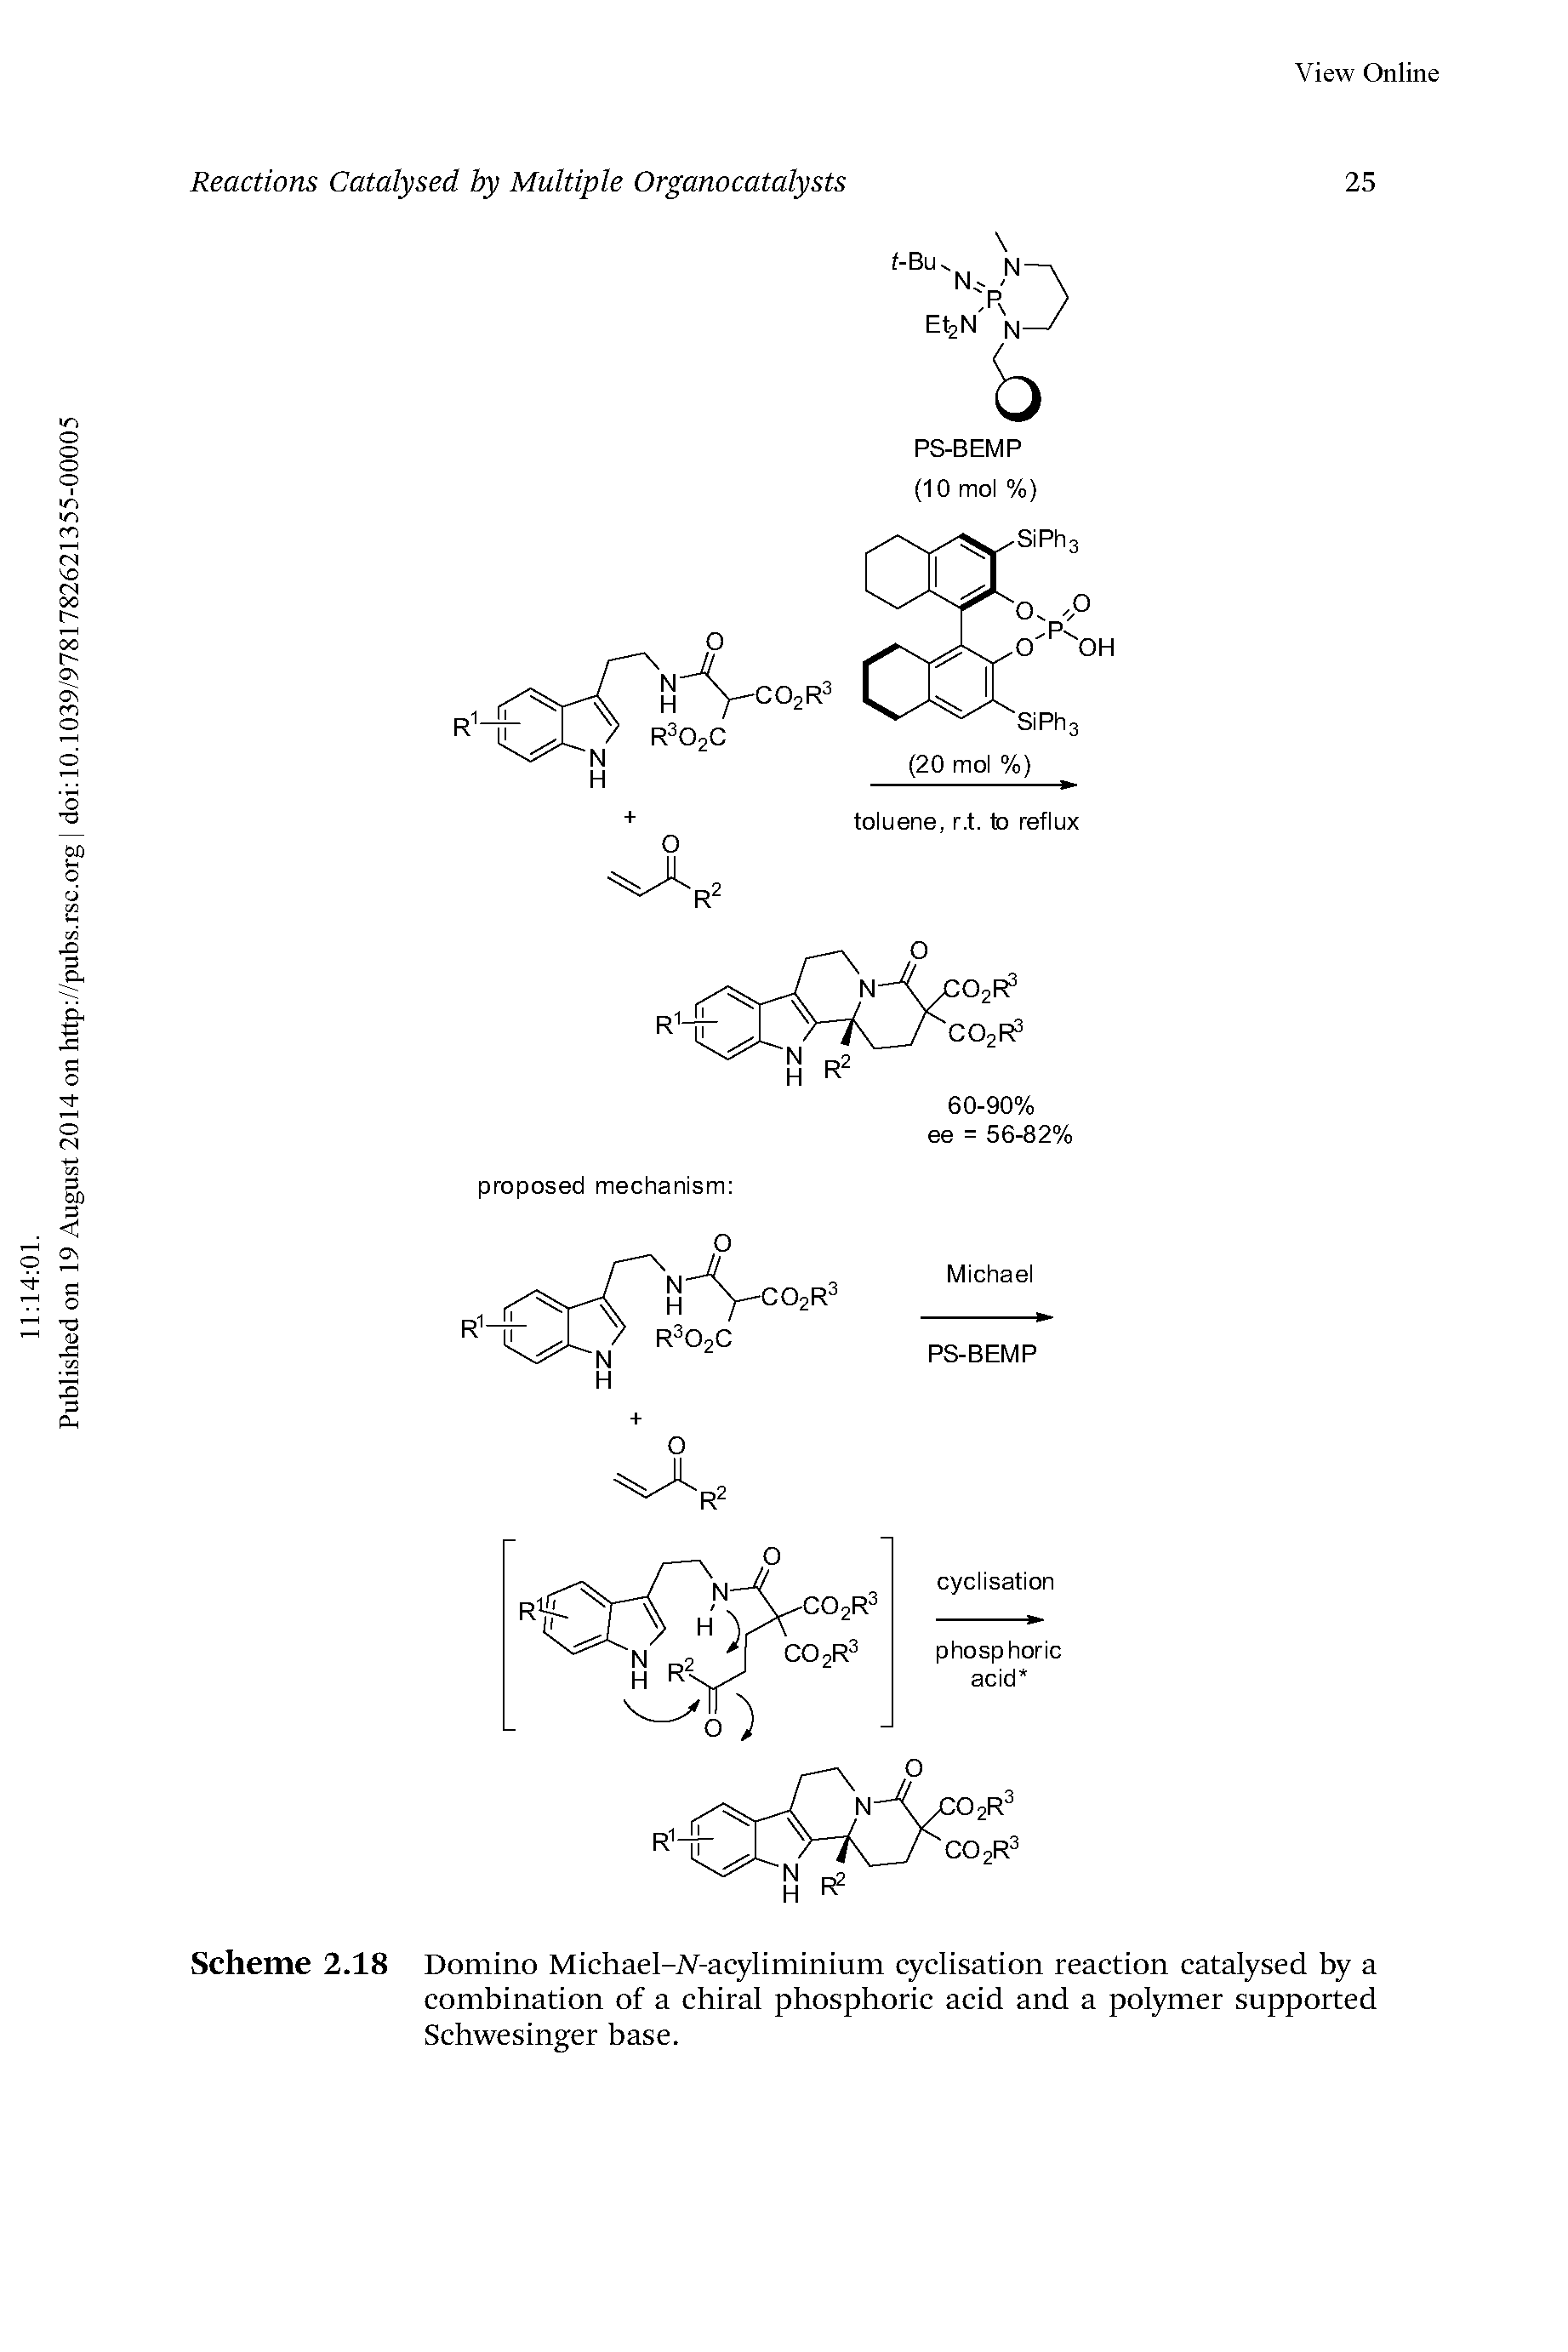 Scheme 2.18 Domino Michael-iV-acyliminium cyclisation reaction catalysed by a combination of a chiral phosphoric acid and a polymer supported Schwesinger base.